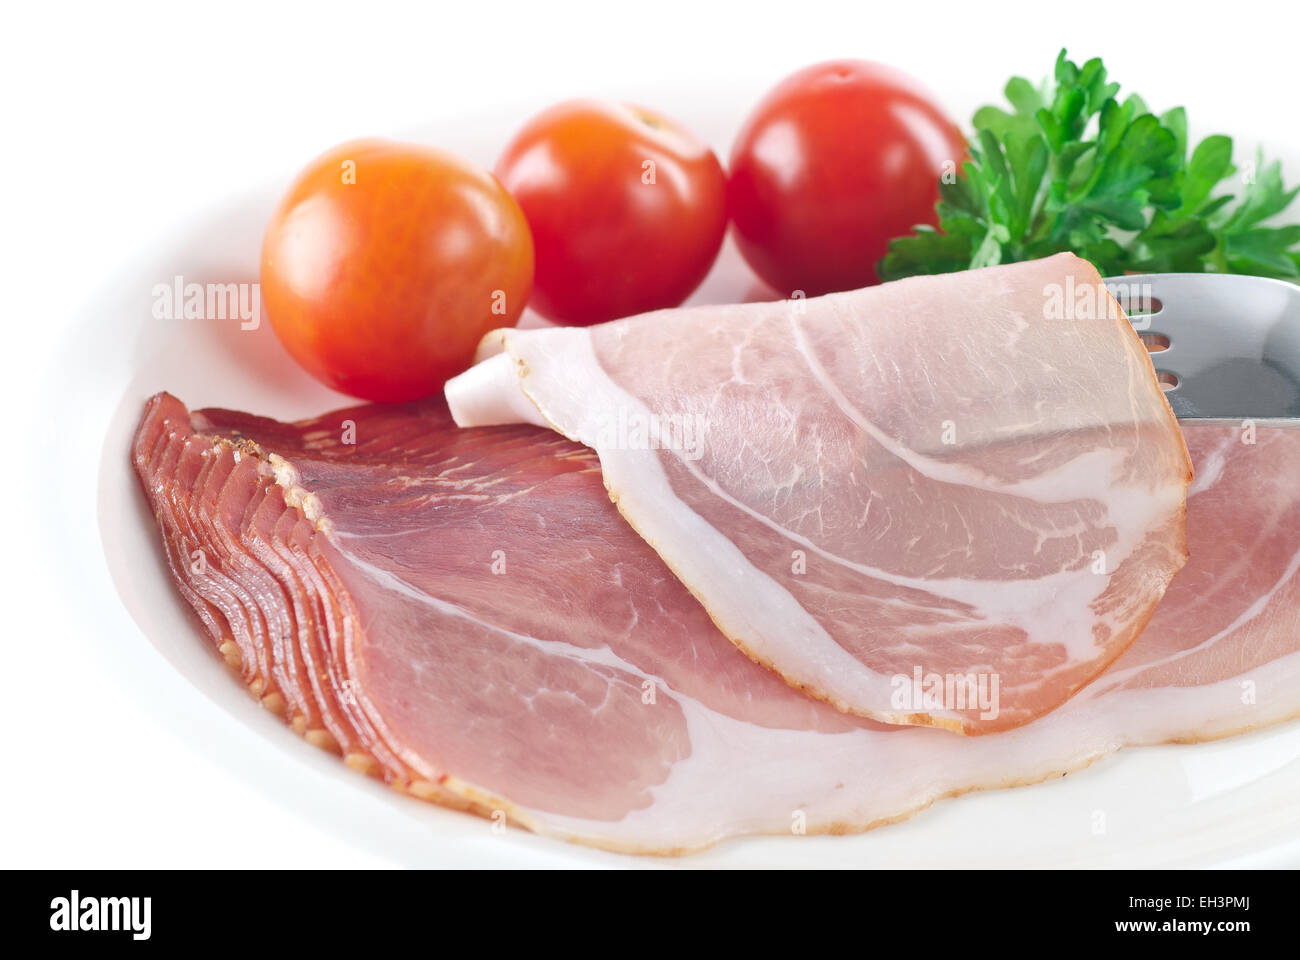 Sliced smoked ham garnished with tomato and parsley. Stock Photo